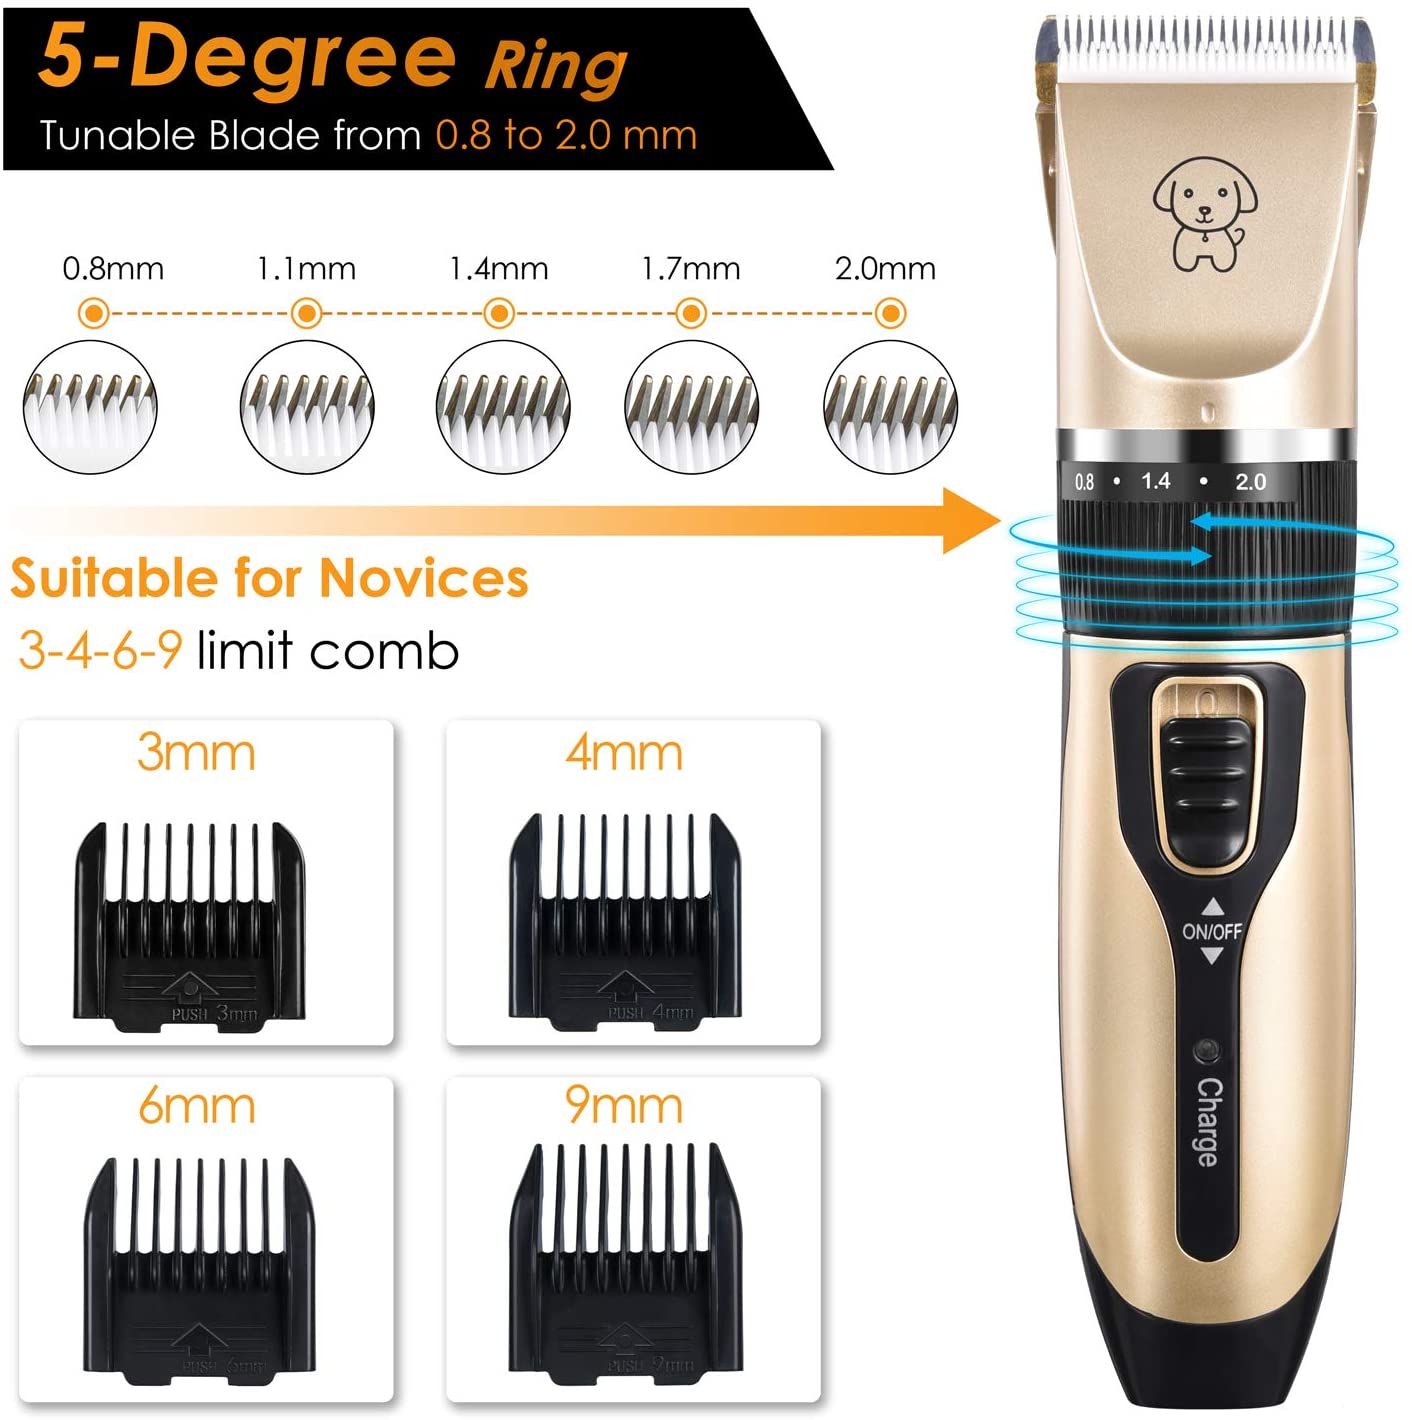 🔥Mother's Day Sale - 65% OFF🔥 Ultra Silent Electric Pet Hair Clipper